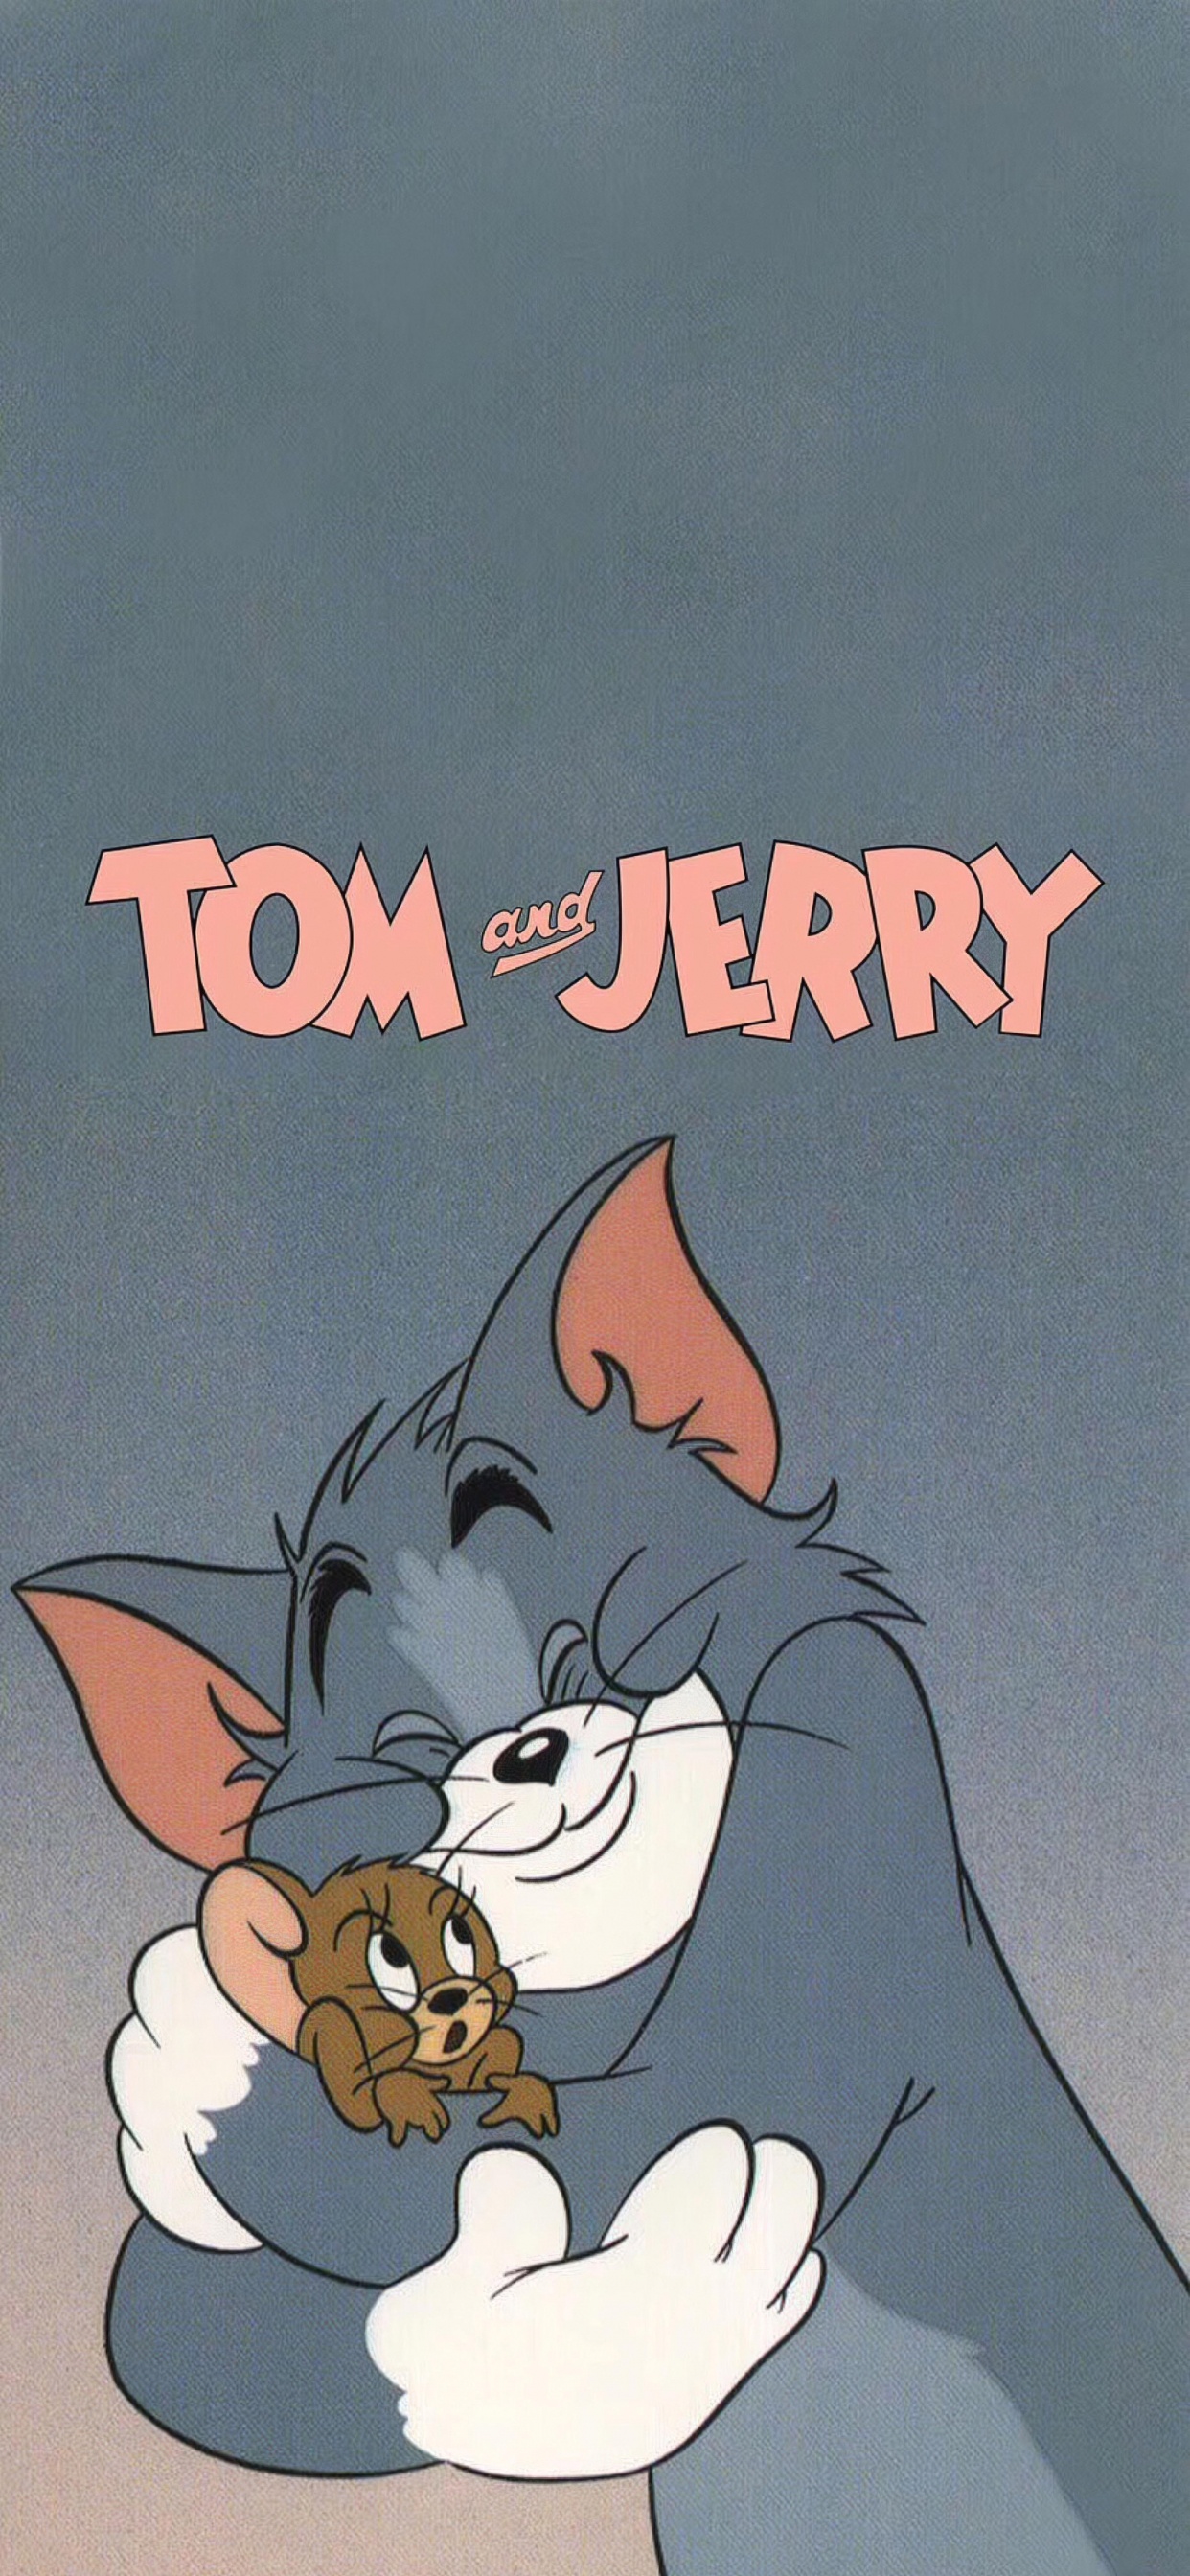 Tom and Jerry Aesthetic, Tom Cat, Jerry Mouse, Aesthetics, Cartoon. Wallpaper in 1242x2688 Resolution